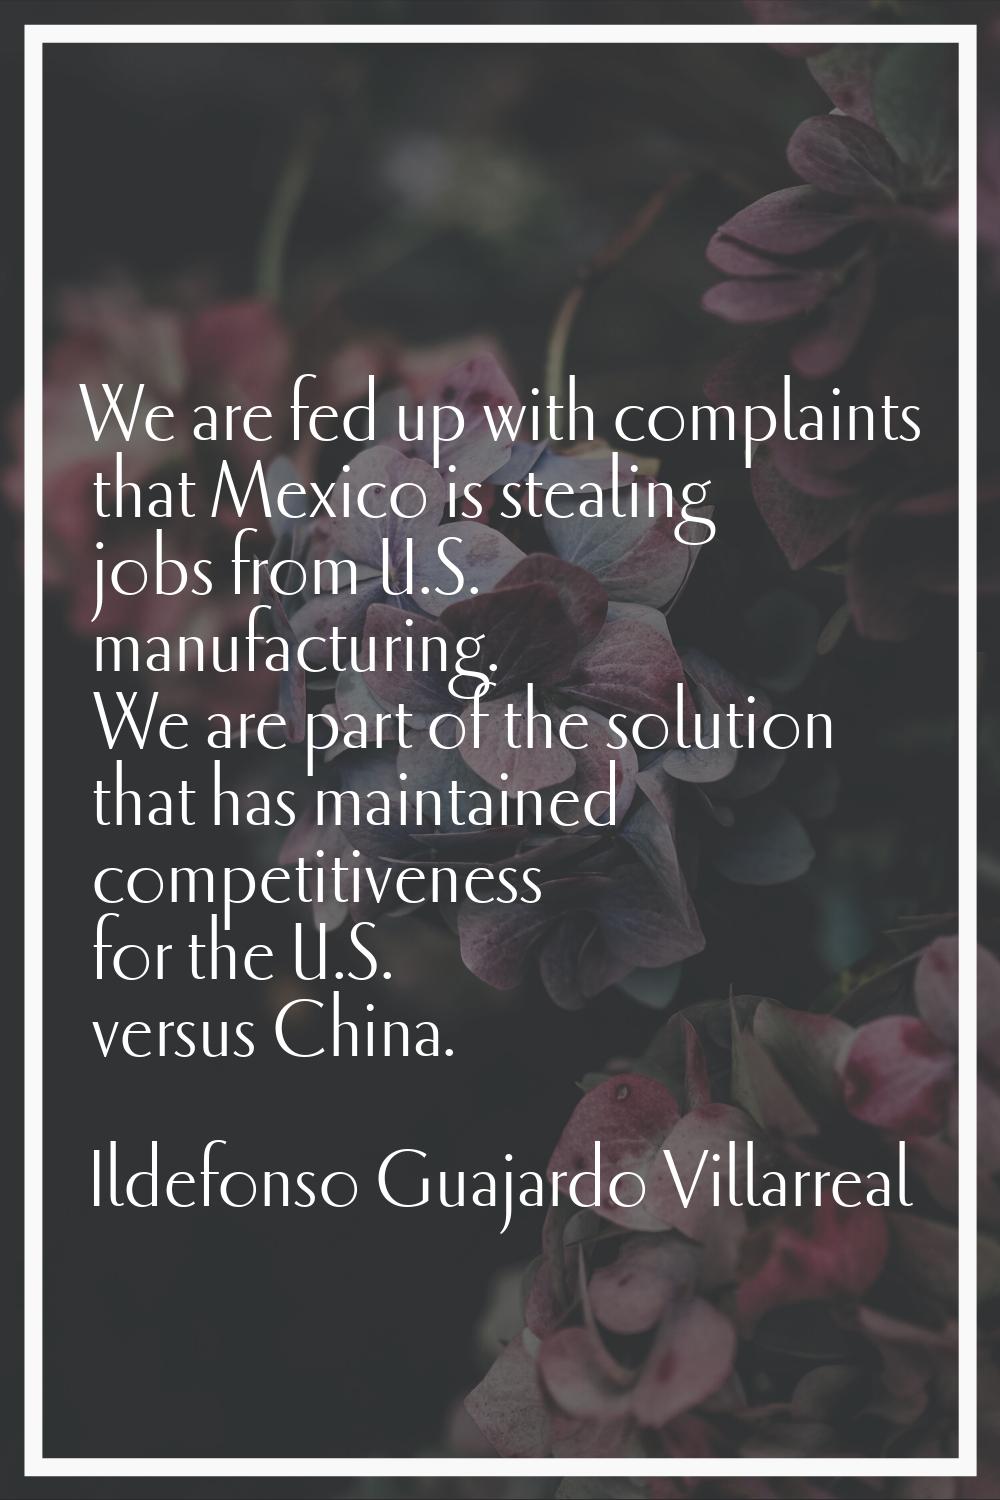 We are fed up with complaints that Mexico is stealing jobs from U.S. manufacturing. We are part of 